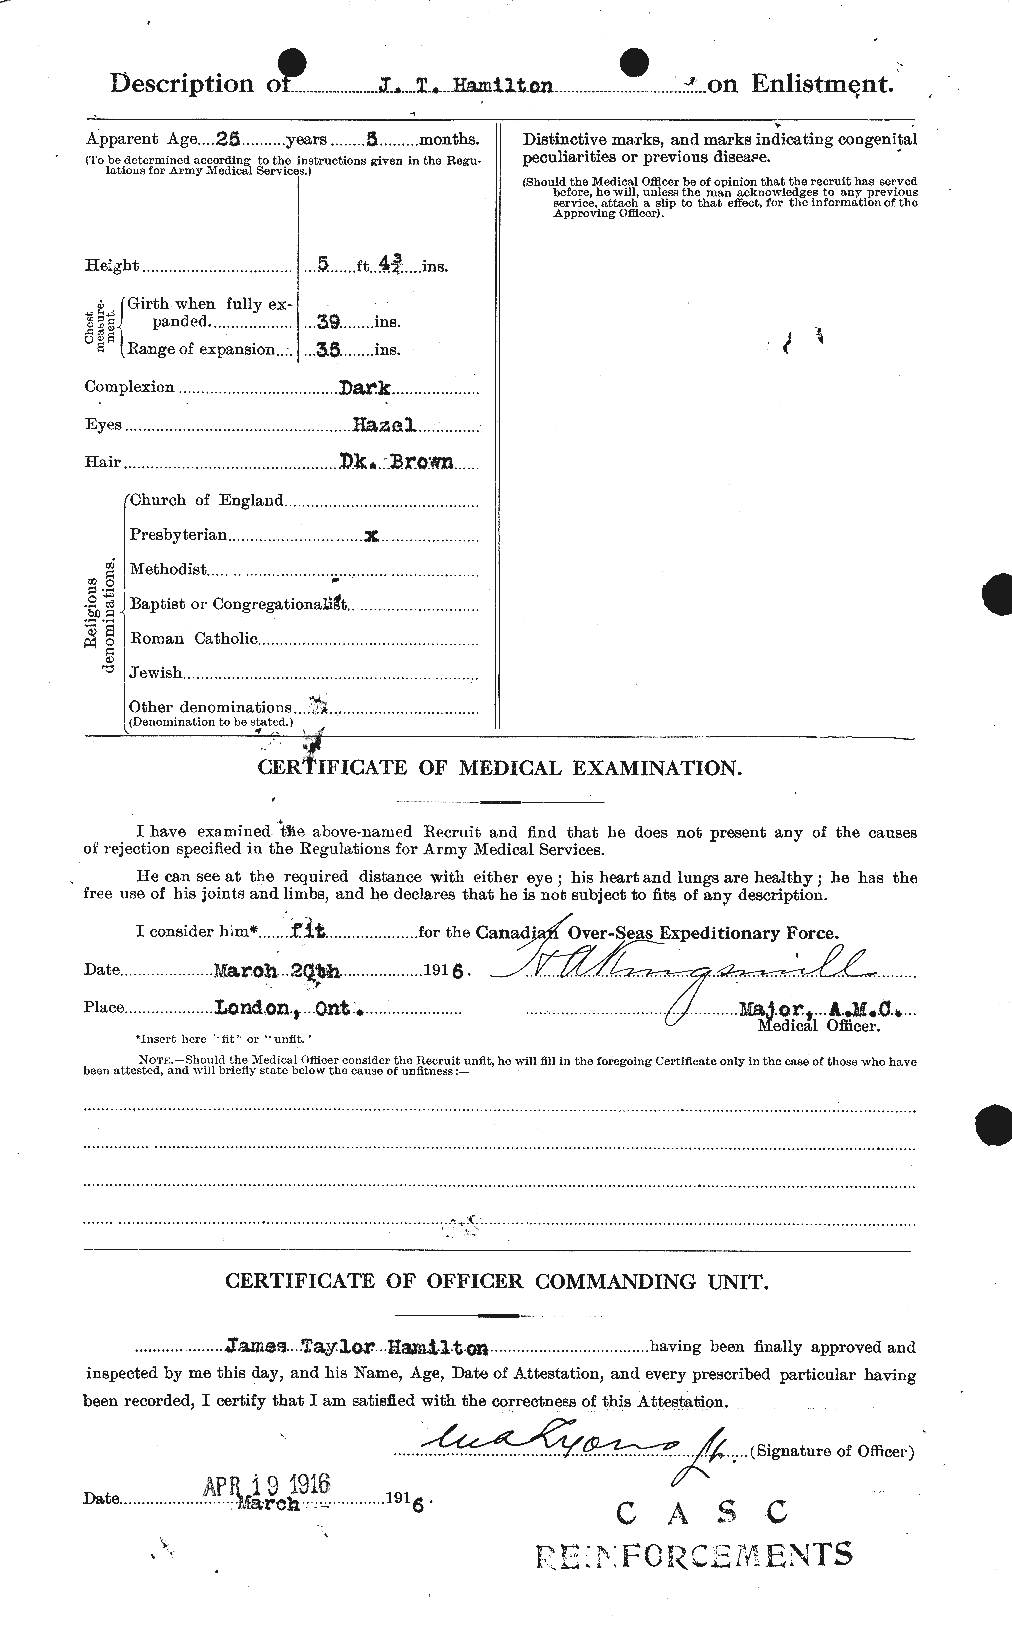 Personnel Records of the First World War - CEF 373004b